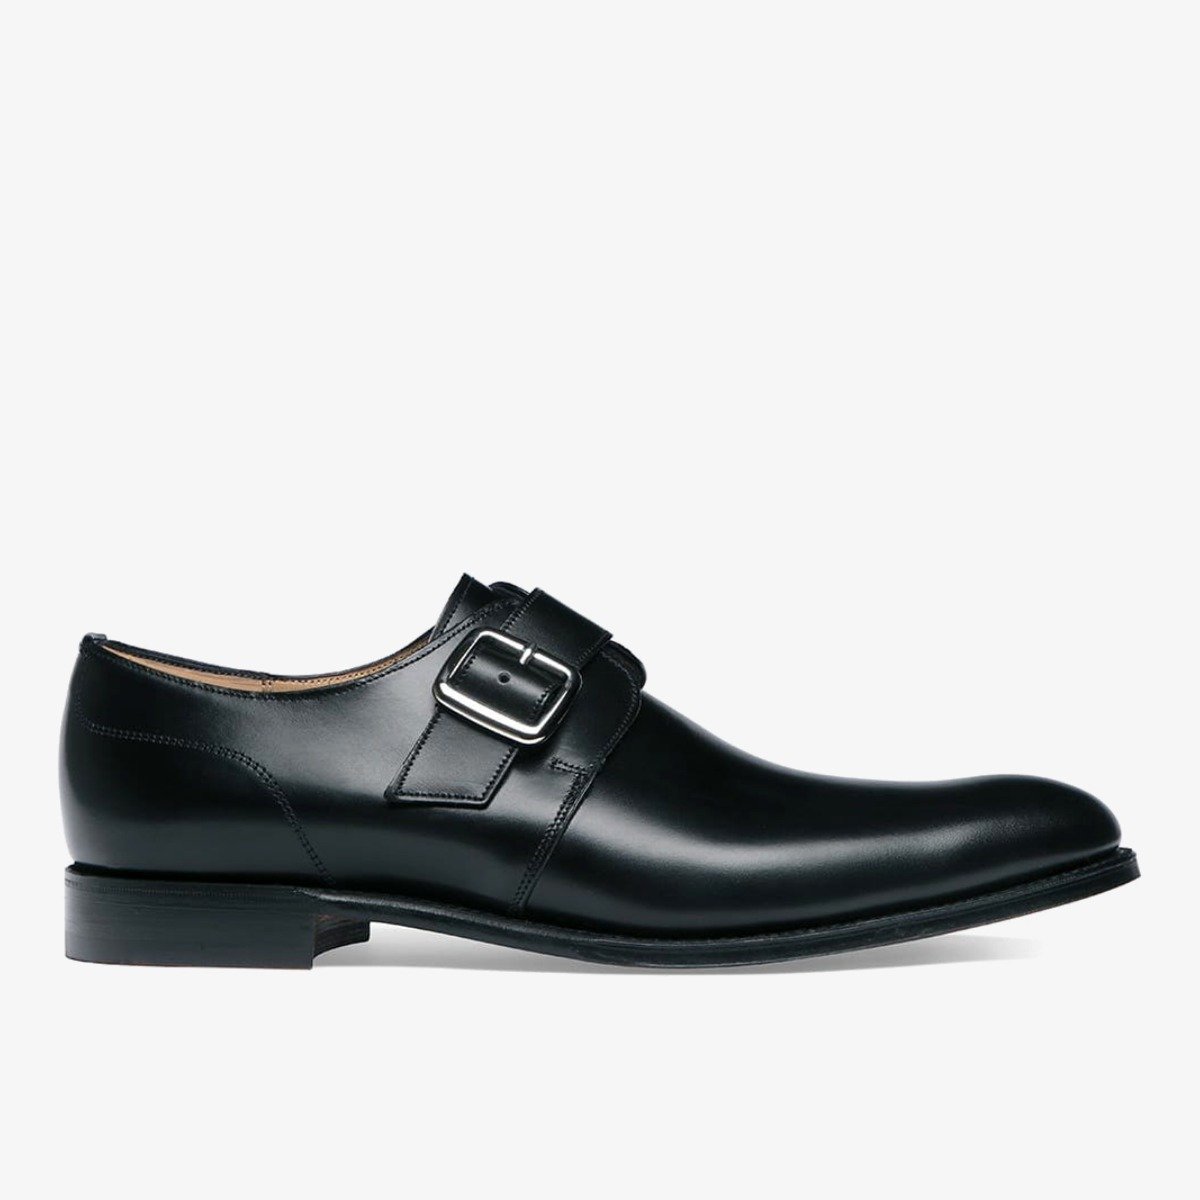 Cheaney Moorgate black monk strap shoes